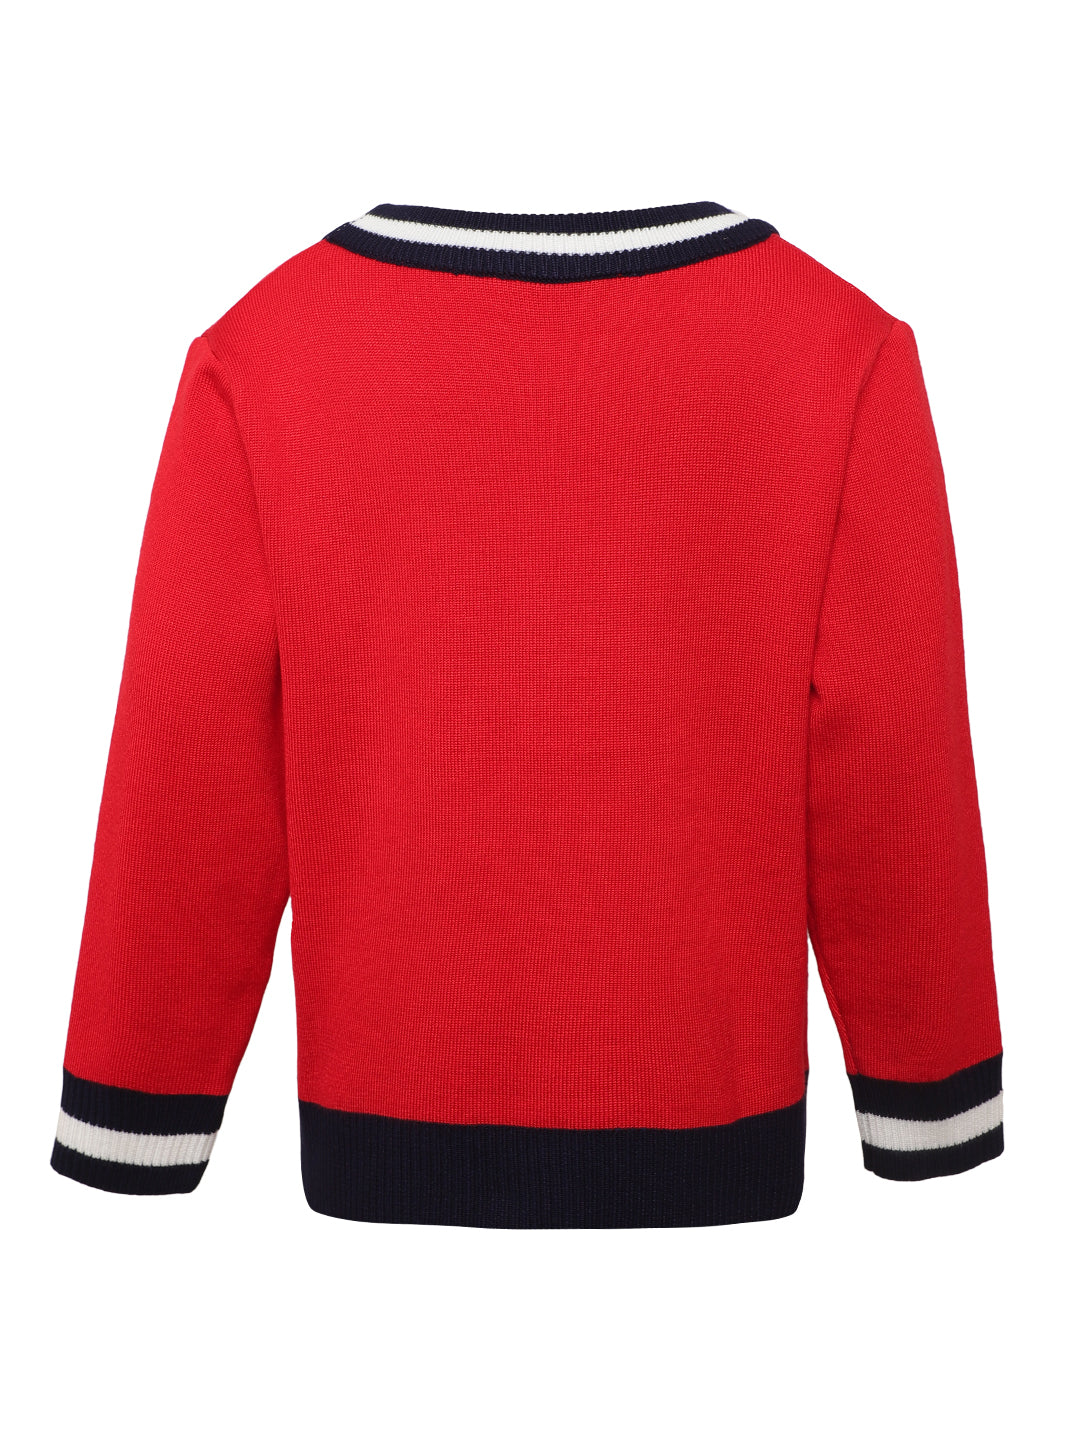 Giggles & Wiggles Boys Red Baby Club V Neck Printed Sweaters